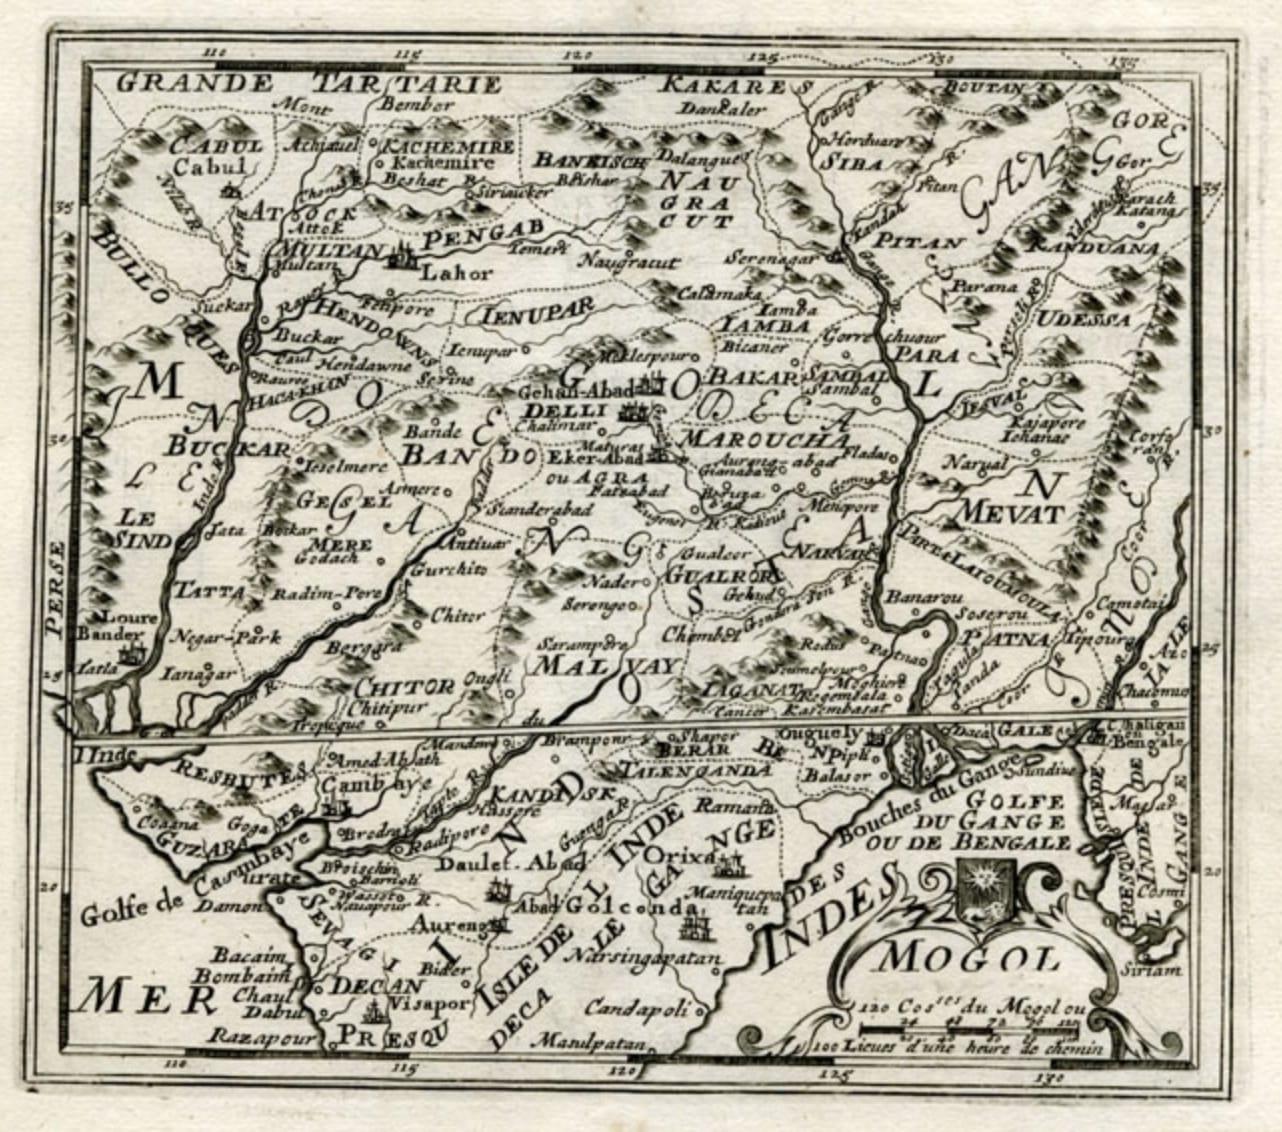 Antique map titled 'Mogol'. 

Map of Northern India and Pakistan ('Mogol'), showing Kabul, Delhi and surroundings. This map originates from 'Kort begrip der Oude en Nieuwe Staatkundige Geographie', by W.A. Bachiene, published by Covens & Mortier